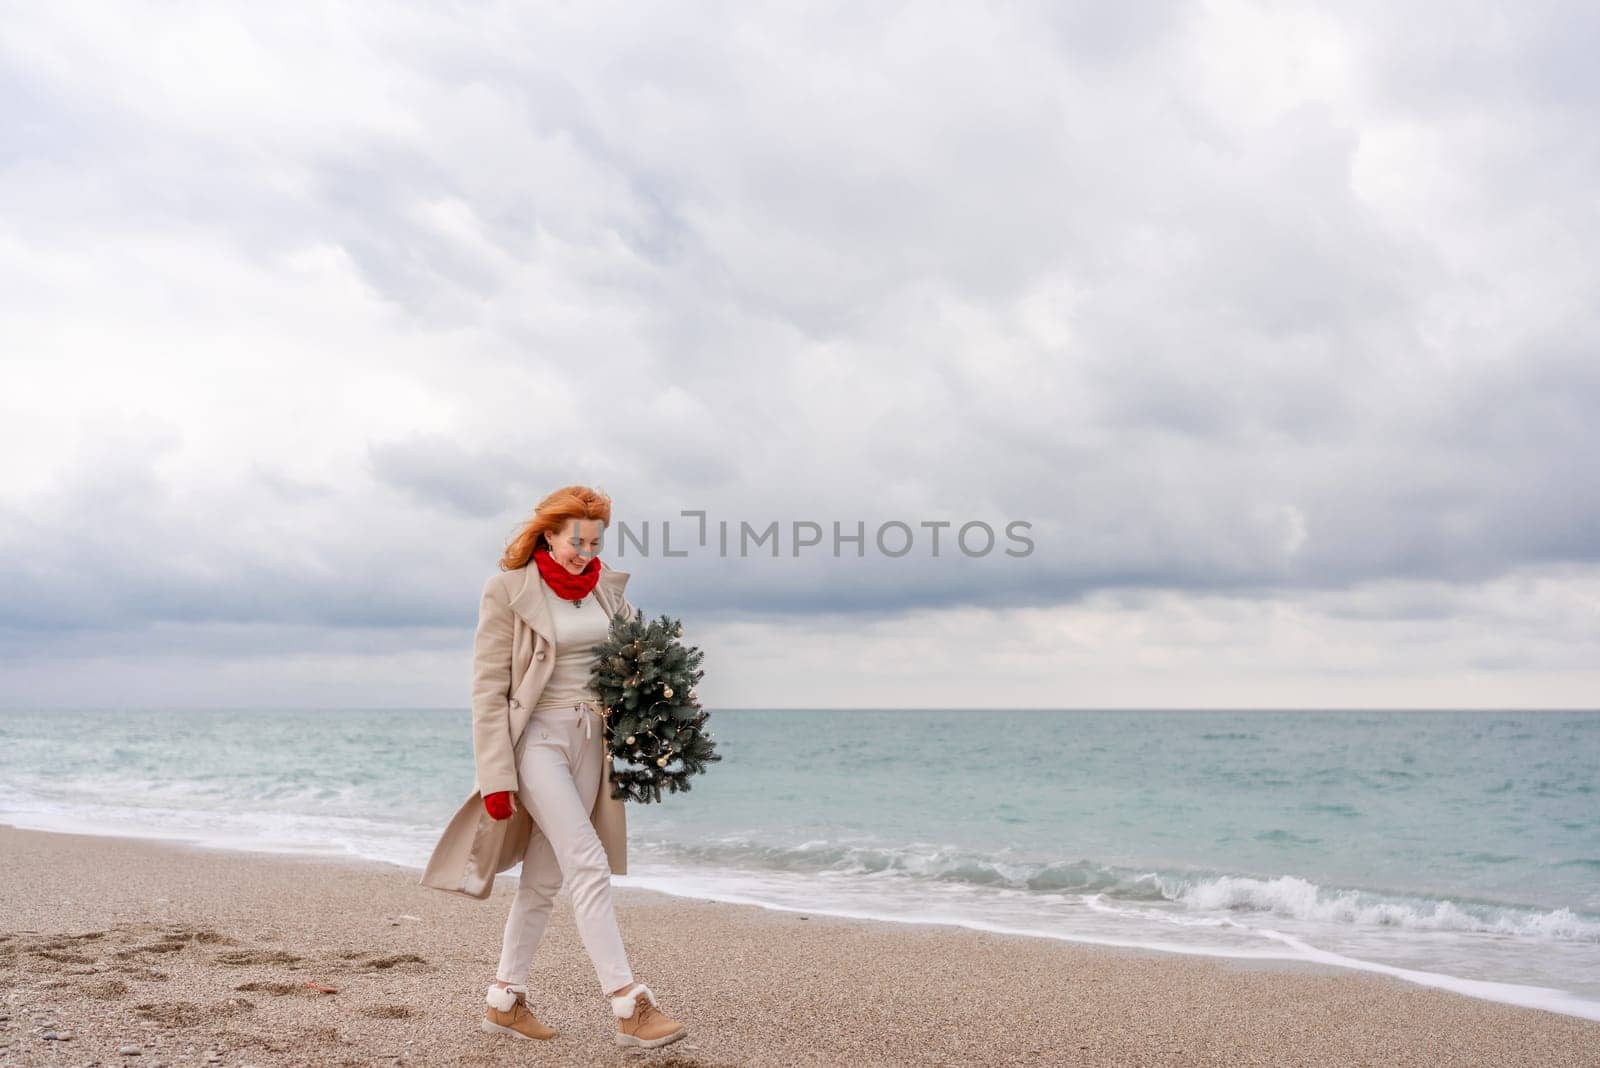 Redhead woman Christmas tree sea. Christmas portrait of a happy redhead woman walking along the beach and holding a Christmas tree in her hands. Dressed in a light coat, white suit and red mittens